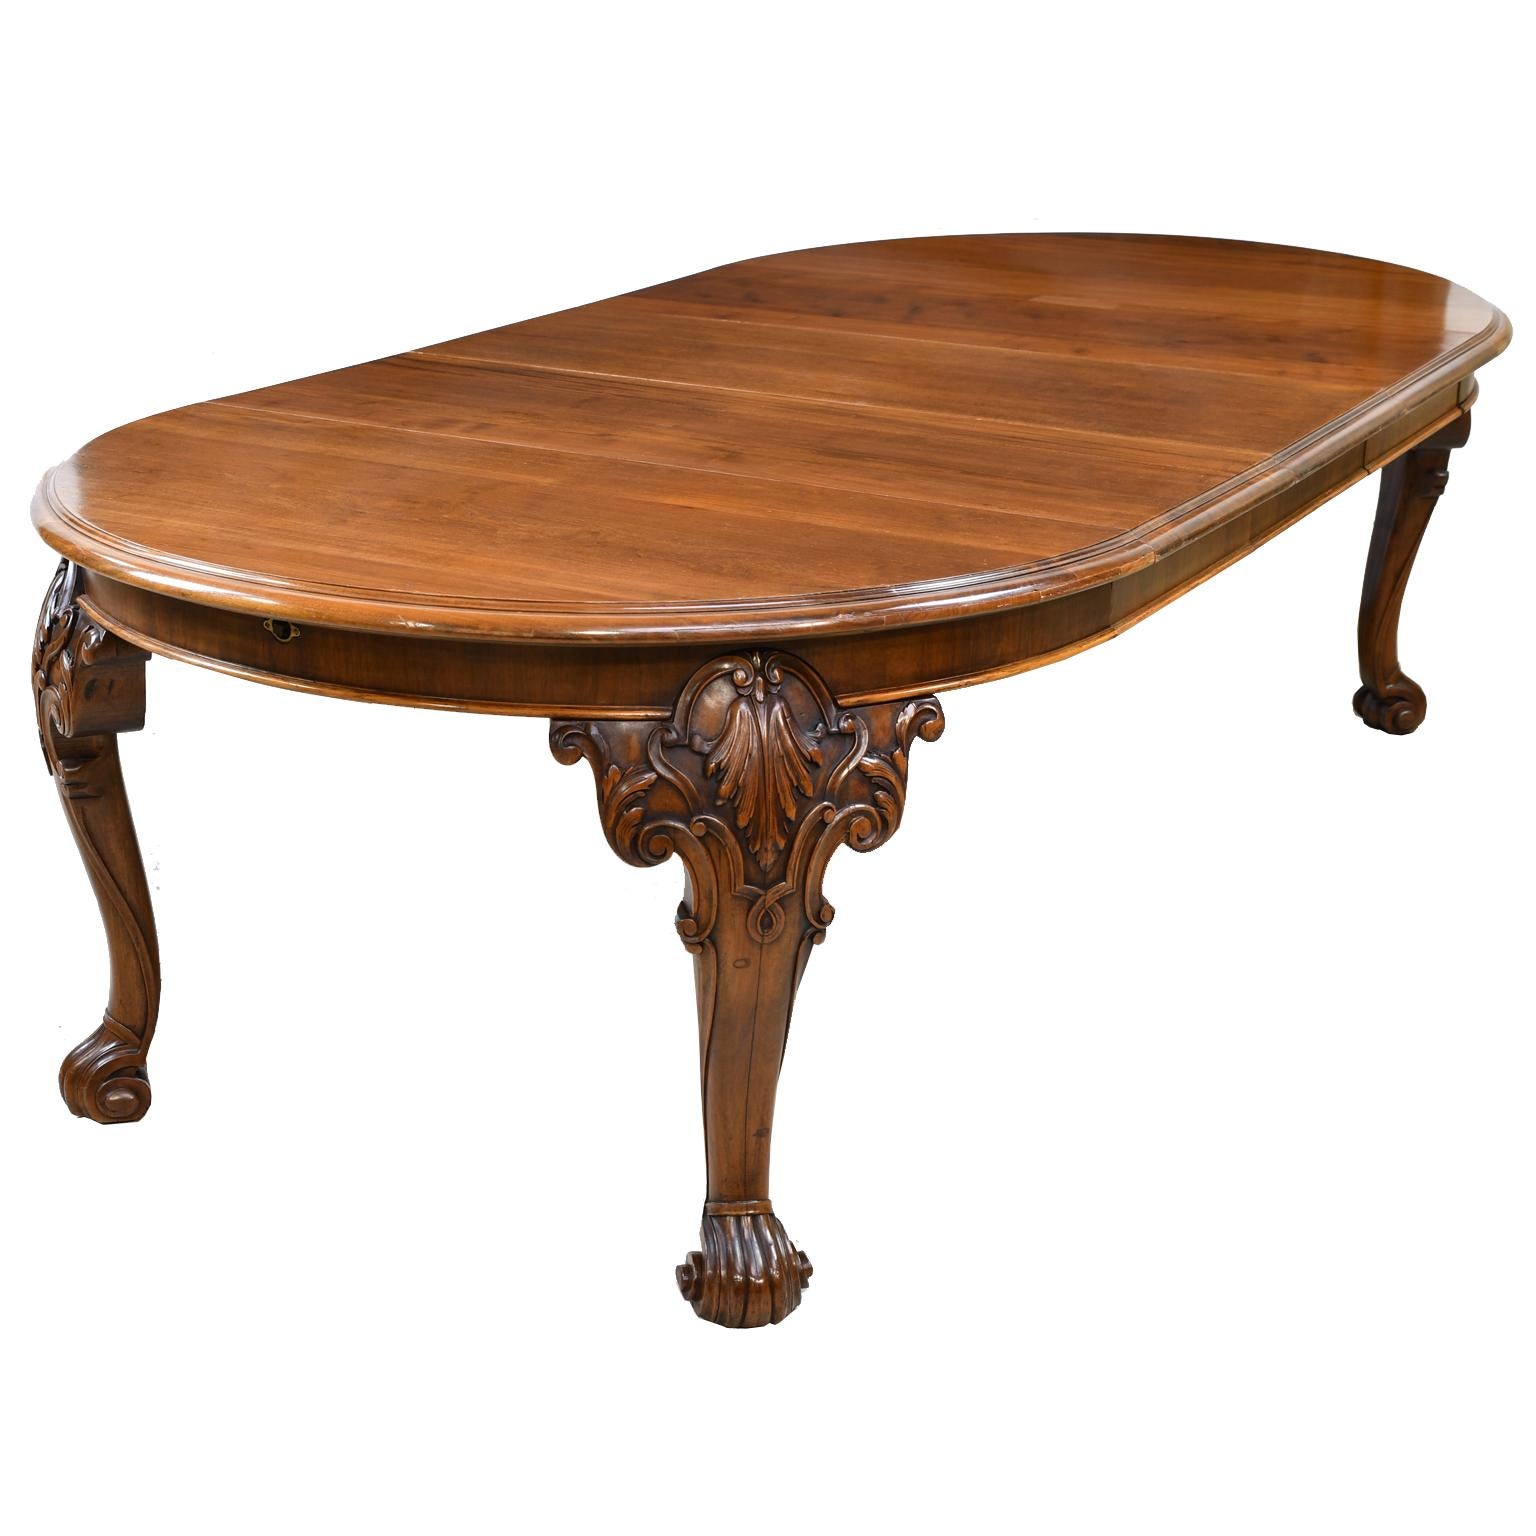 19th Century American Victorian Solid Walnut Crank Dining Table w/ 3 Skirted Leaves, c 1870 